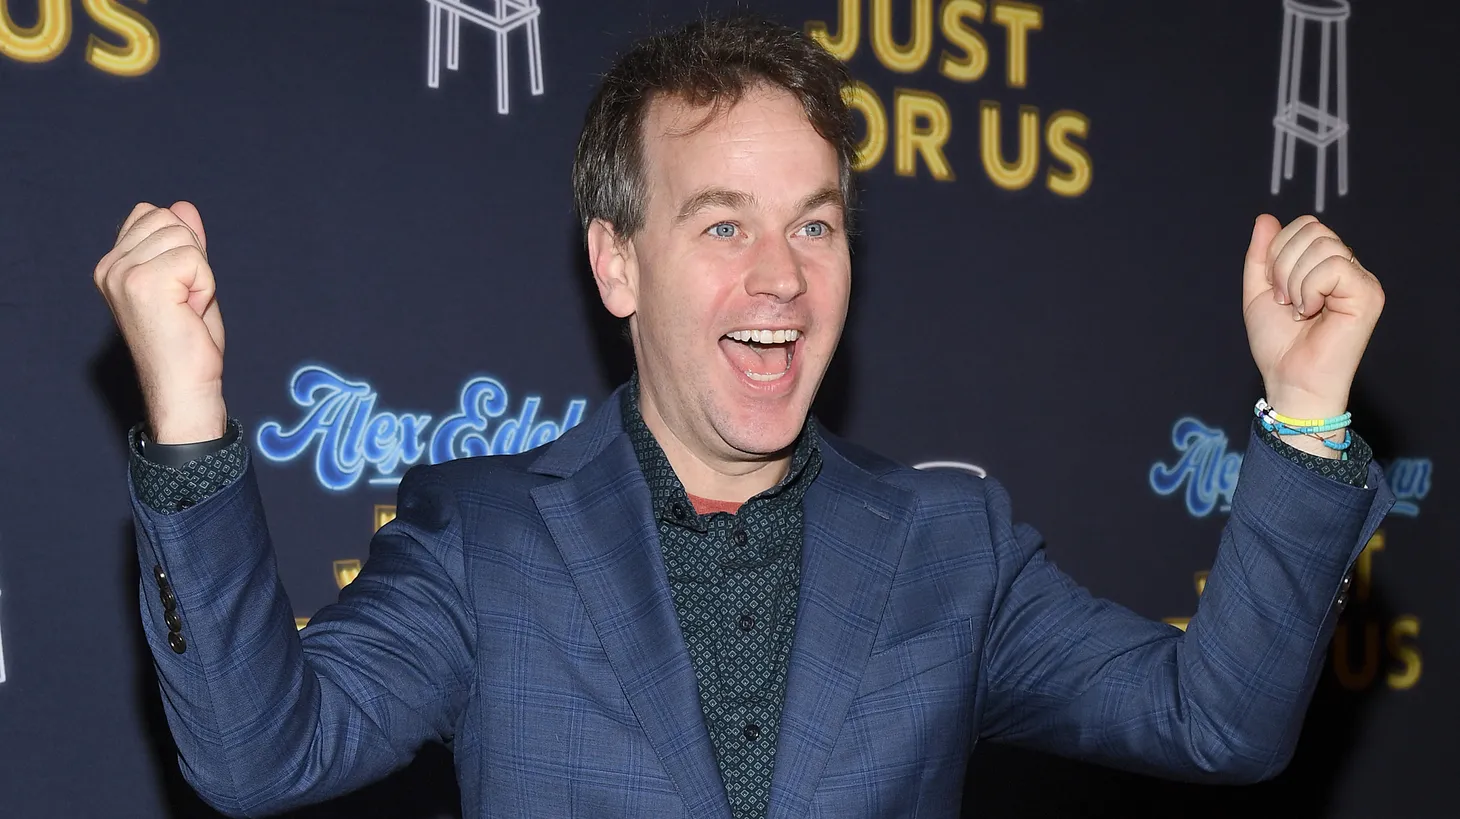 Mike Birbiglia attends the "Just For Us" Broadway Opening Night at Hudson Theatre, New York, NY, June 26, 2023